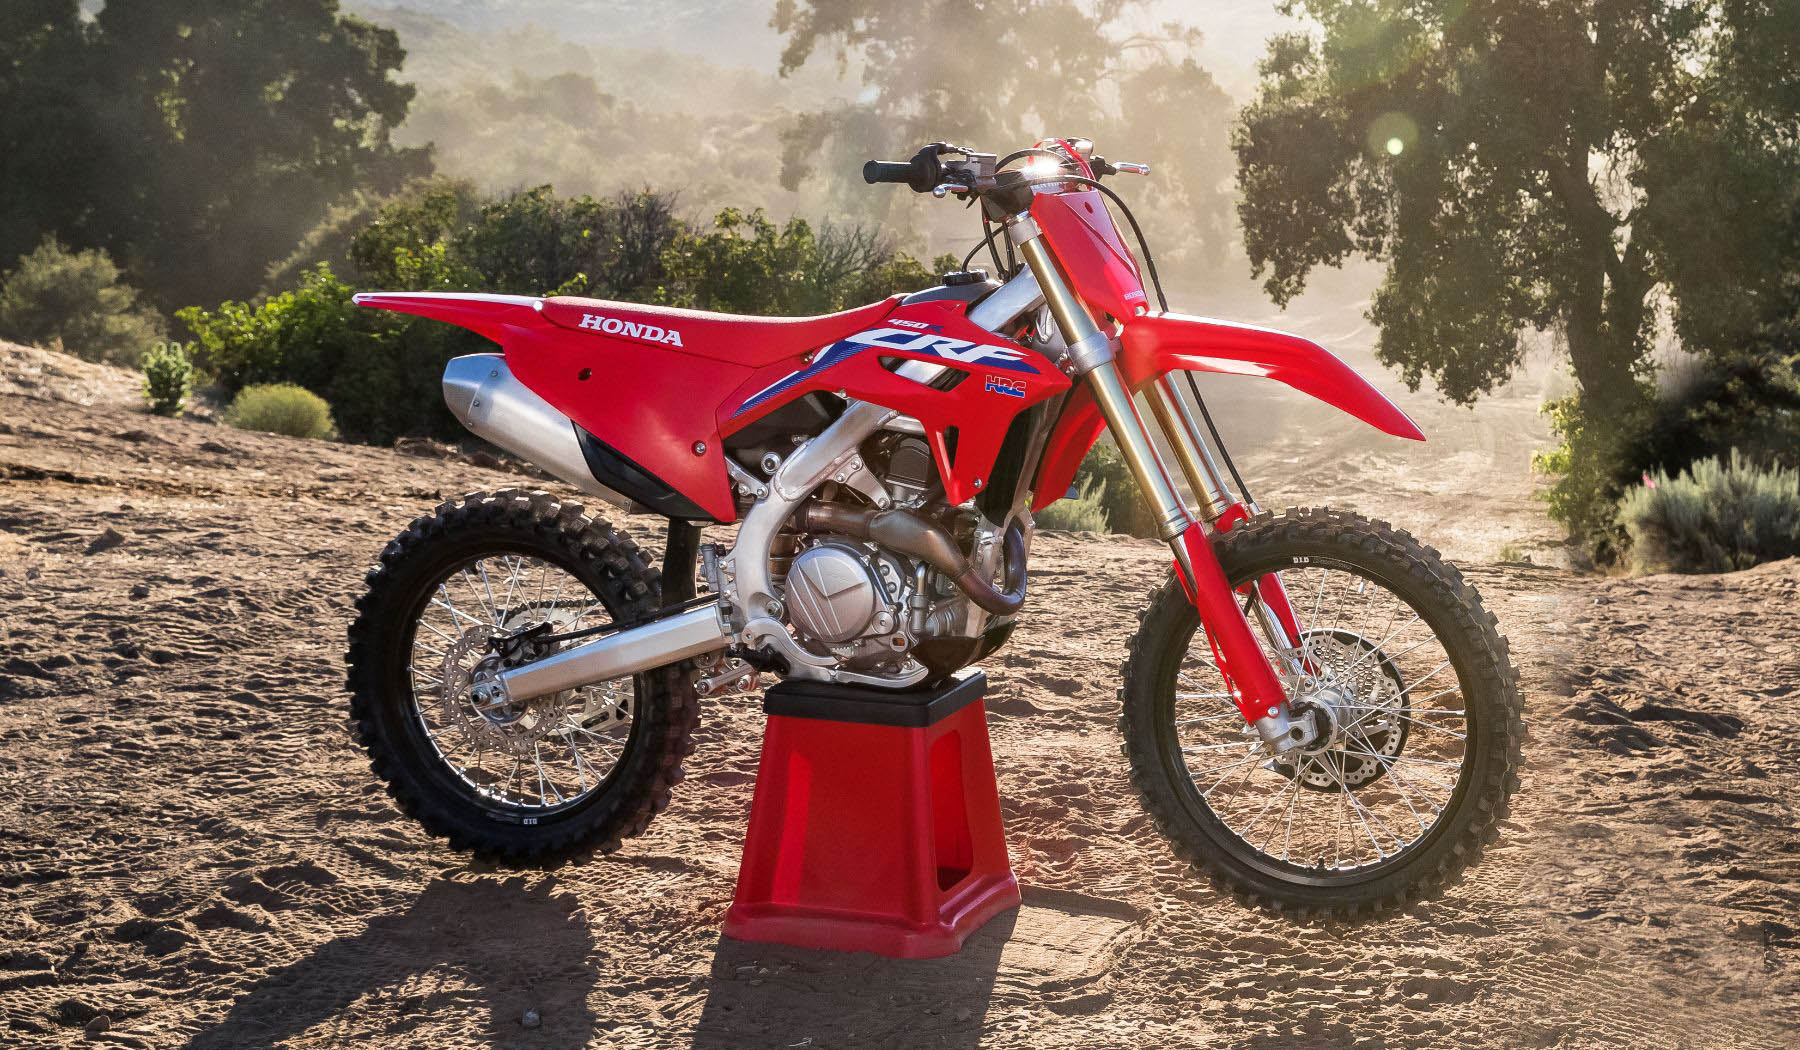 Here's Why the 2021 Honda CRF450R Is One of the Best Dirt Bikes Money